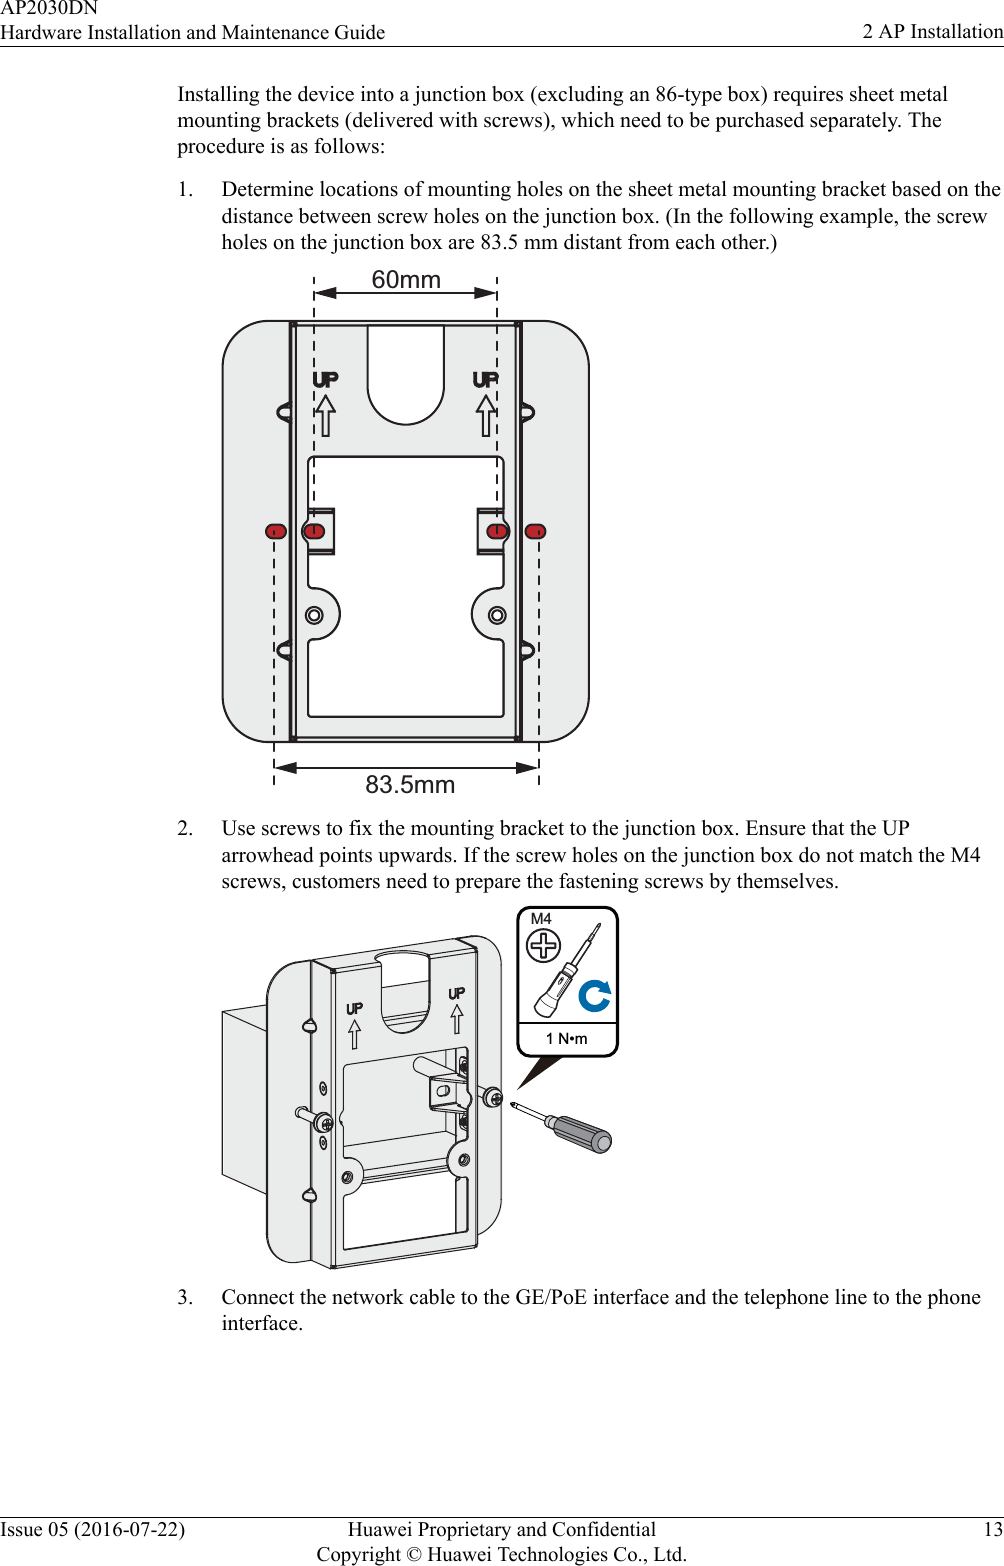 Installing the device into a junction box (excluding an 86-type box) requires sheet metalmounting brackets (delivered with screws), which need to be purchased separately. Theprocedure is as follows:1. Determine locations of mounting holes on the sheet metal mounting bracket based on thedistance between screw holes on the junction box. (In the following example, the screwholes on the junction box are 83.5 mm distant from each other.)60mm83.5mm2. Use screws to fix the mounting bracket to the junction box. Ensure that the UParrowhead points upwards. If the screw holes on the junction box do not match the M4screws, customers need to prepare the fastening screws by themselves.1 N•mM43. Connect the network cable to the GE/PoE interface and the telephone line to the phoneinterface.AP2030DNHardware Installation and Maintenance Guide 2 AP InstallationIssue 05 (2016-07-22) Huawei Proprietary and ConfidentialCopyright © Huawei Technologies Co., Ltd.13